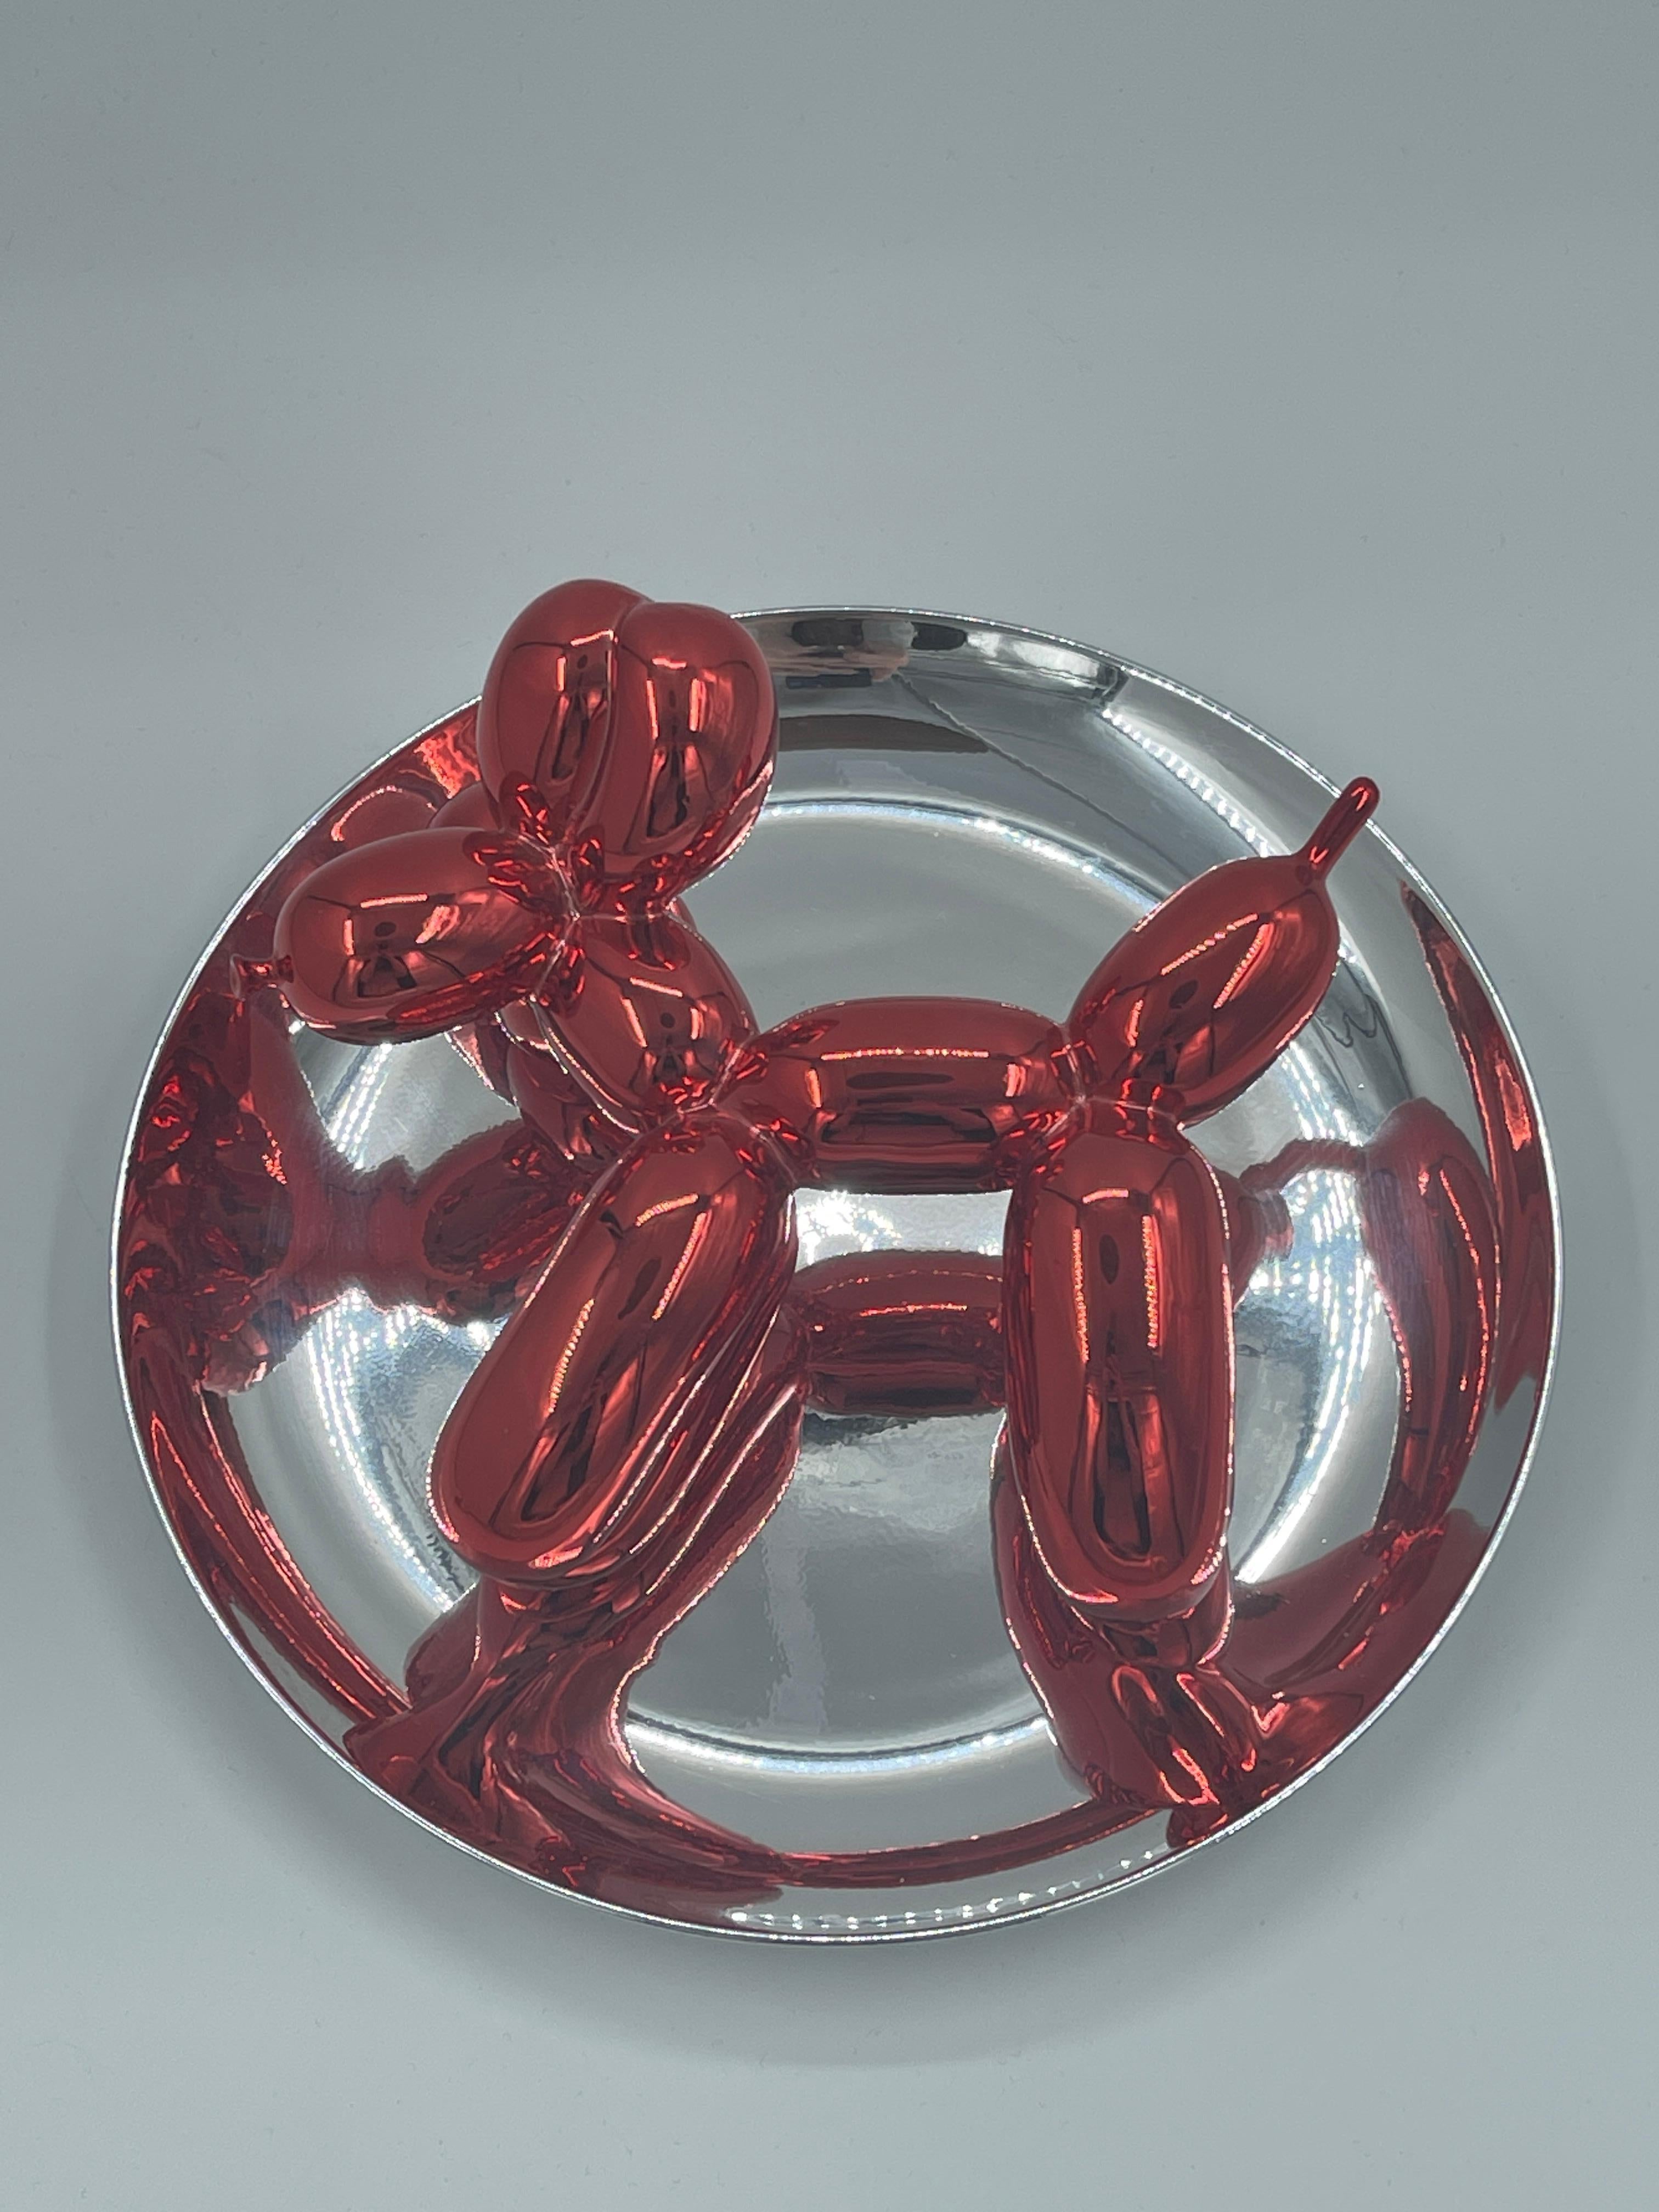 Metallic porcelain plate in red and silver, manufactured in 1995, numbered 723/2300 on the label underneath the plate. Published by the Museum of Contemporary Art, Los Angeles, with original box and without the plastic stand. 